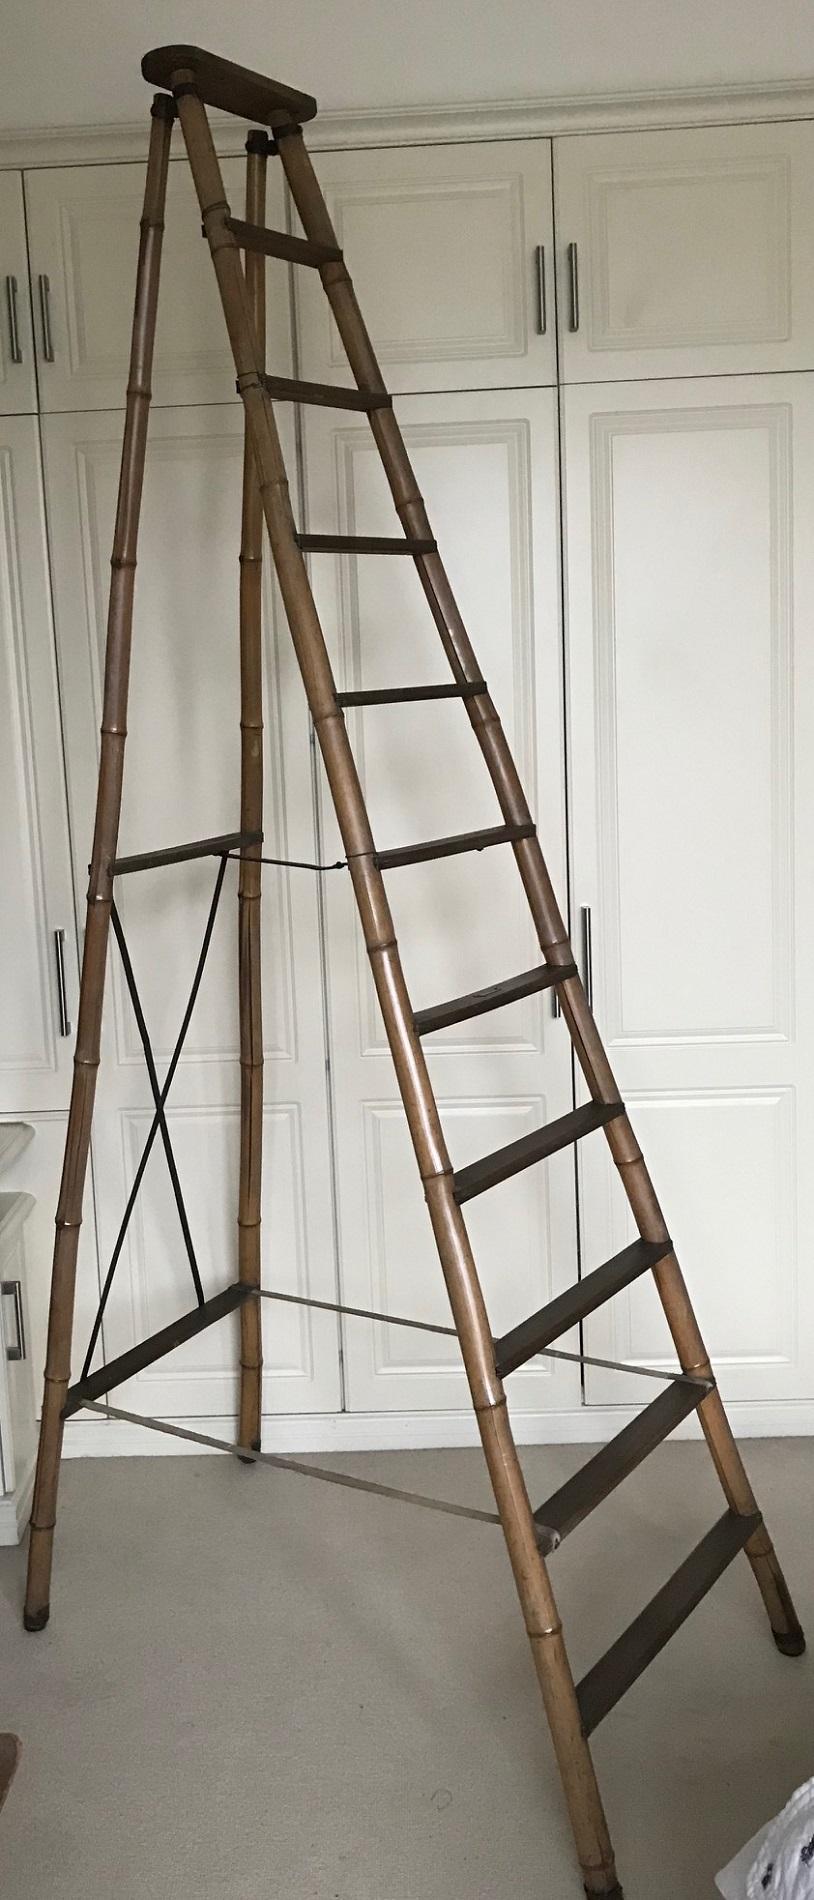 A fantastic pair of tall bamboo French ladders/makers stamp Dijon France. All original. Some damage/splits to the bamboo so not recommended for daily use, though stabile and strong. Wonderful rare decorative object, which would suit a large studio